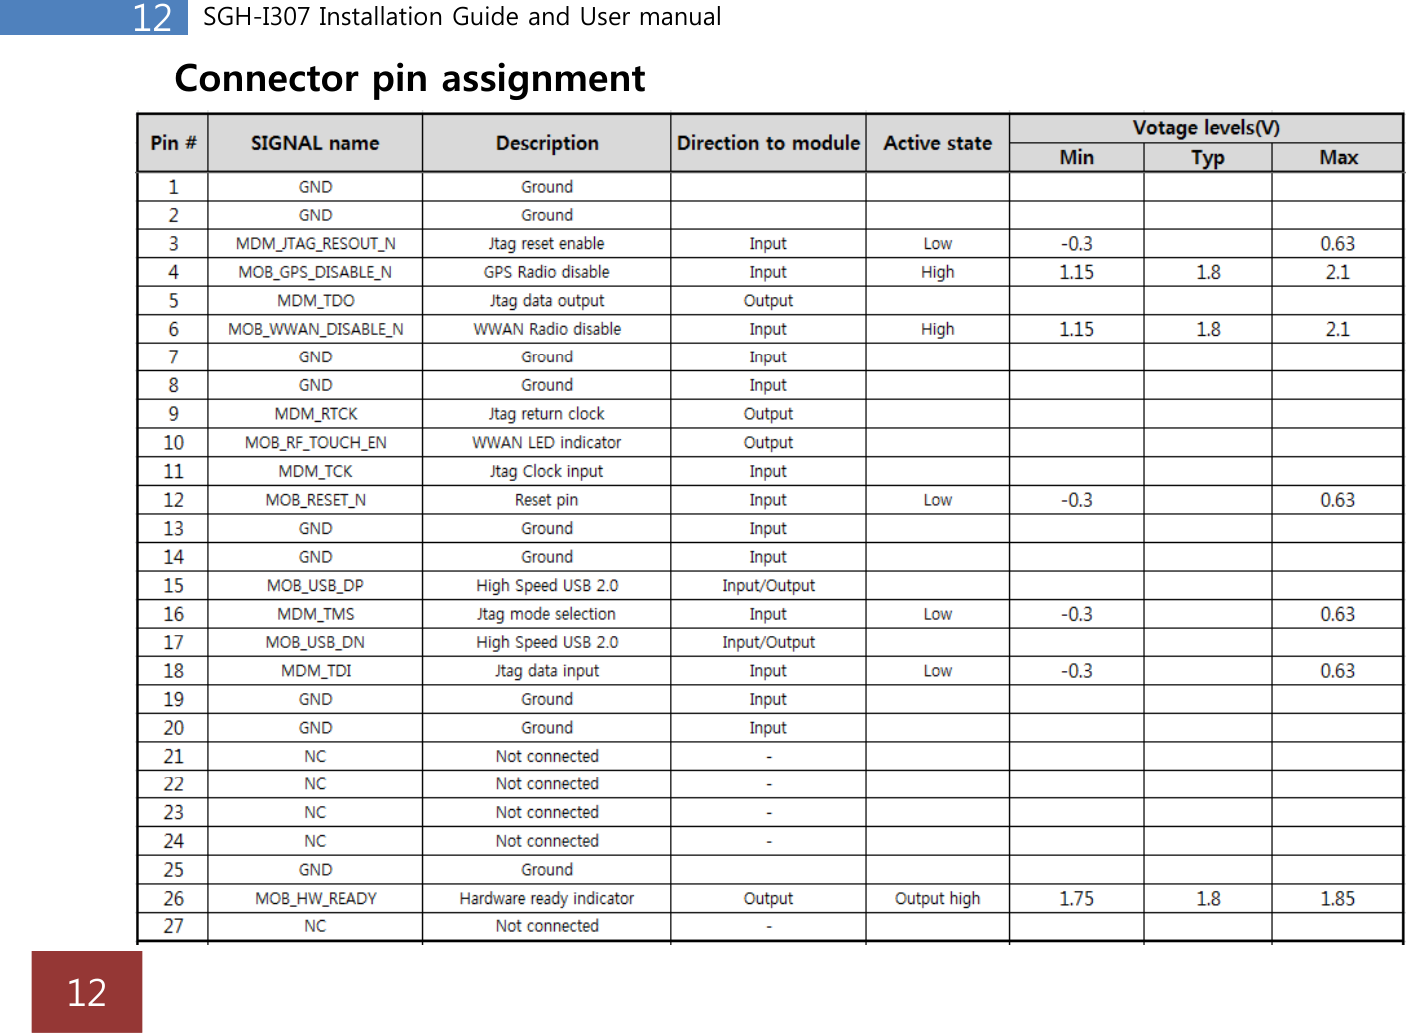 12 SGH-I307 Installation Guide and User manualConnector pin assignmentConnector pin assignment12